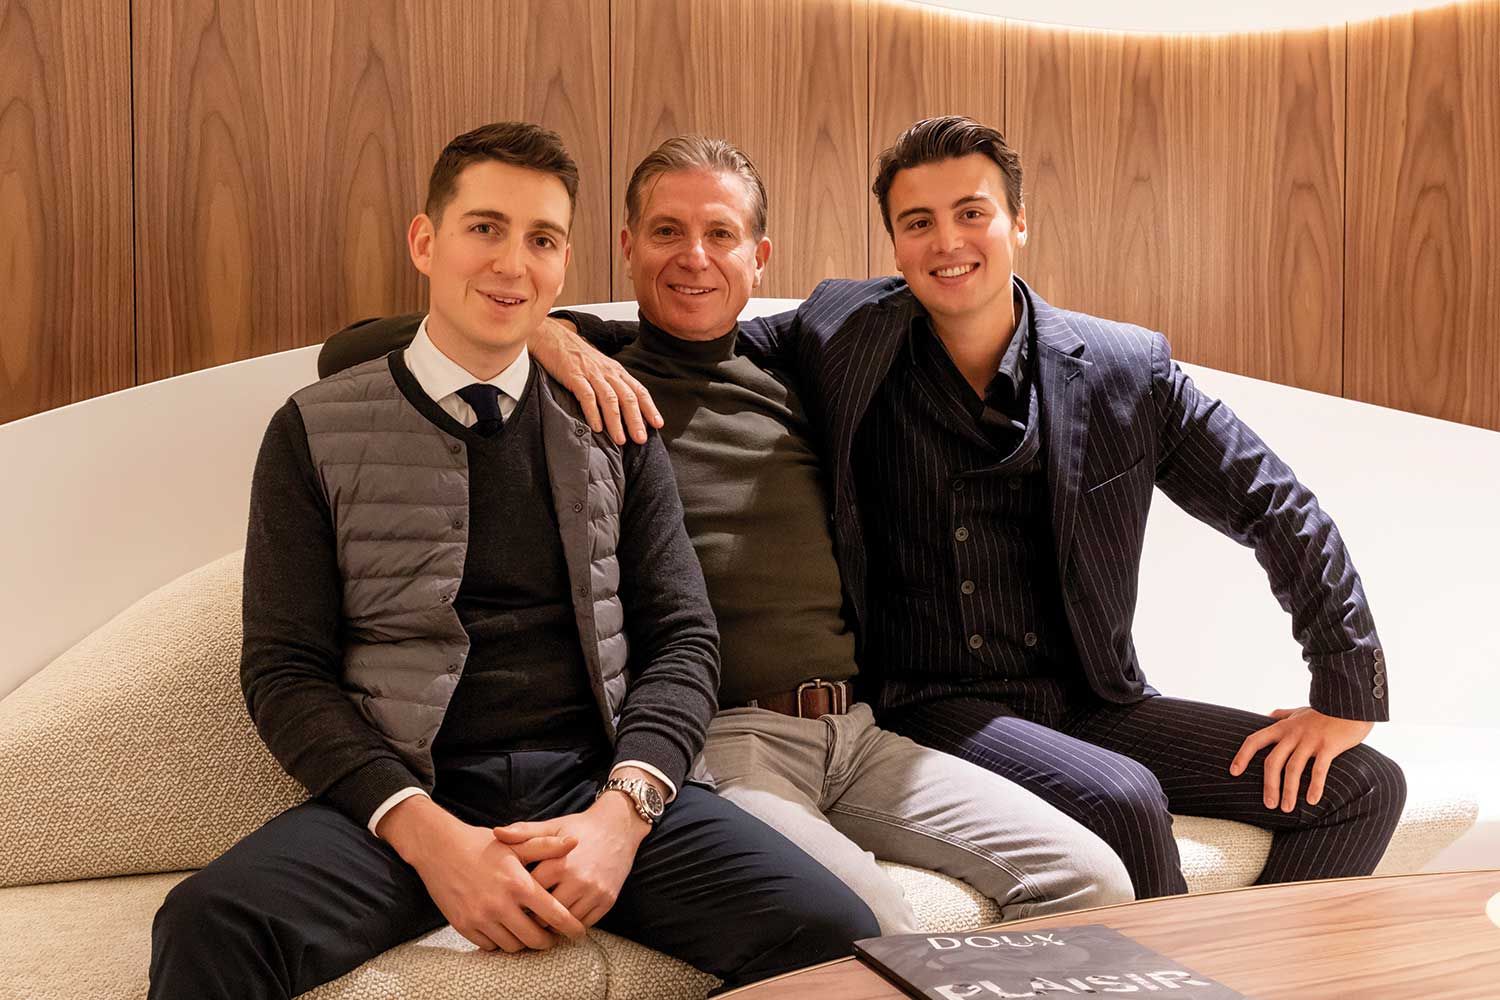 Richard Doux (middle) with his sons Arthur (left) and Ethan (right)